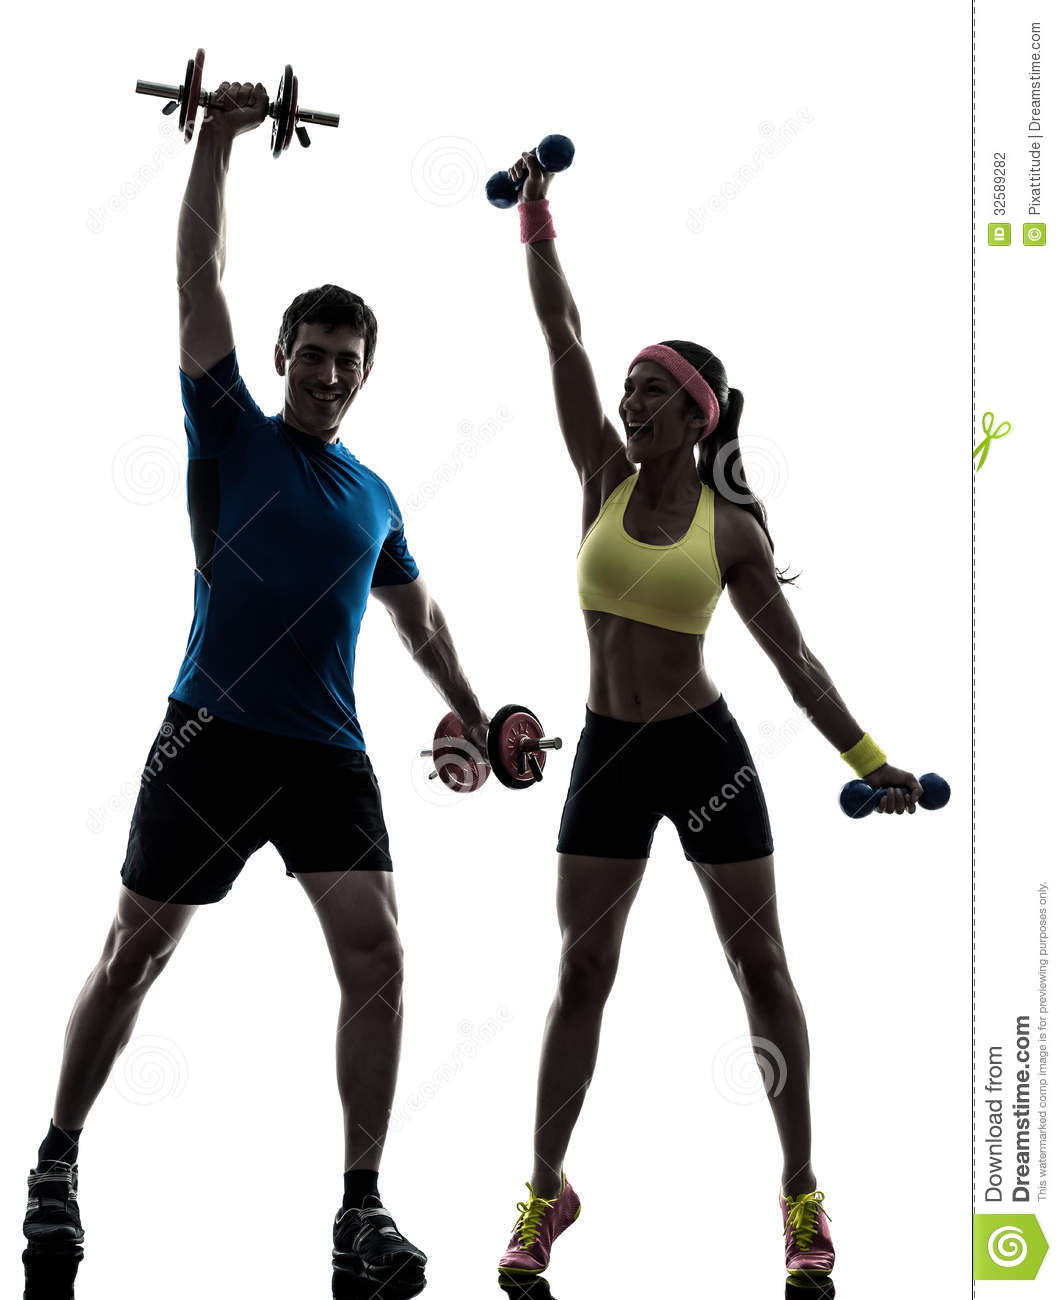 One Women Exercising Fitness Workout With Men Coach In Silhouette On